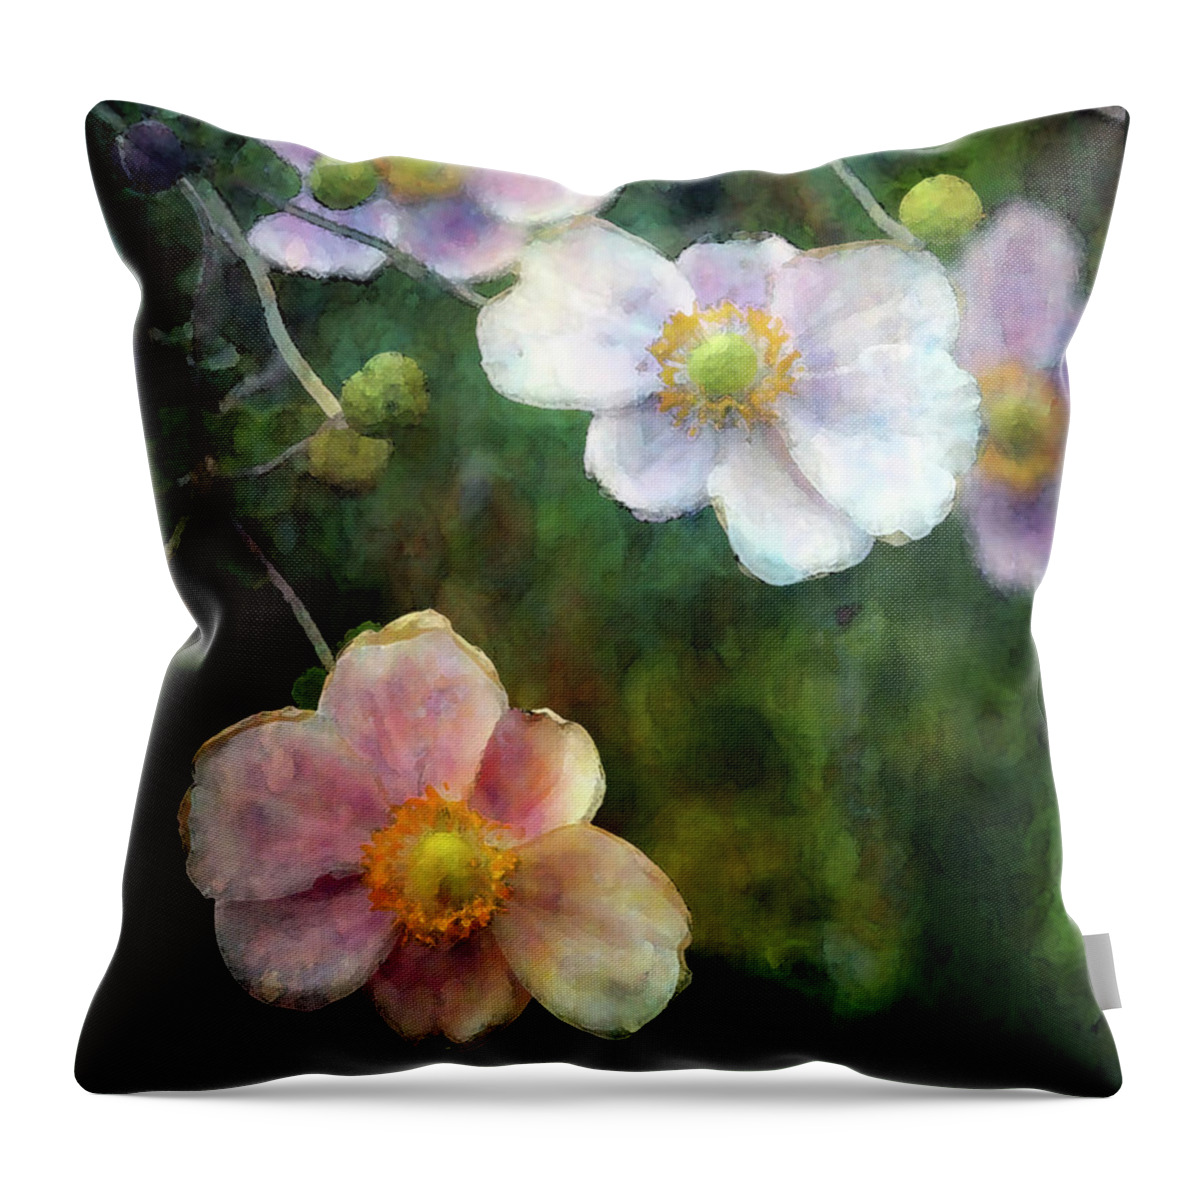 Impressionist Throw Pillow featuring the photograph Light Wood Rose 4781 IDP_4 by Steven Ward